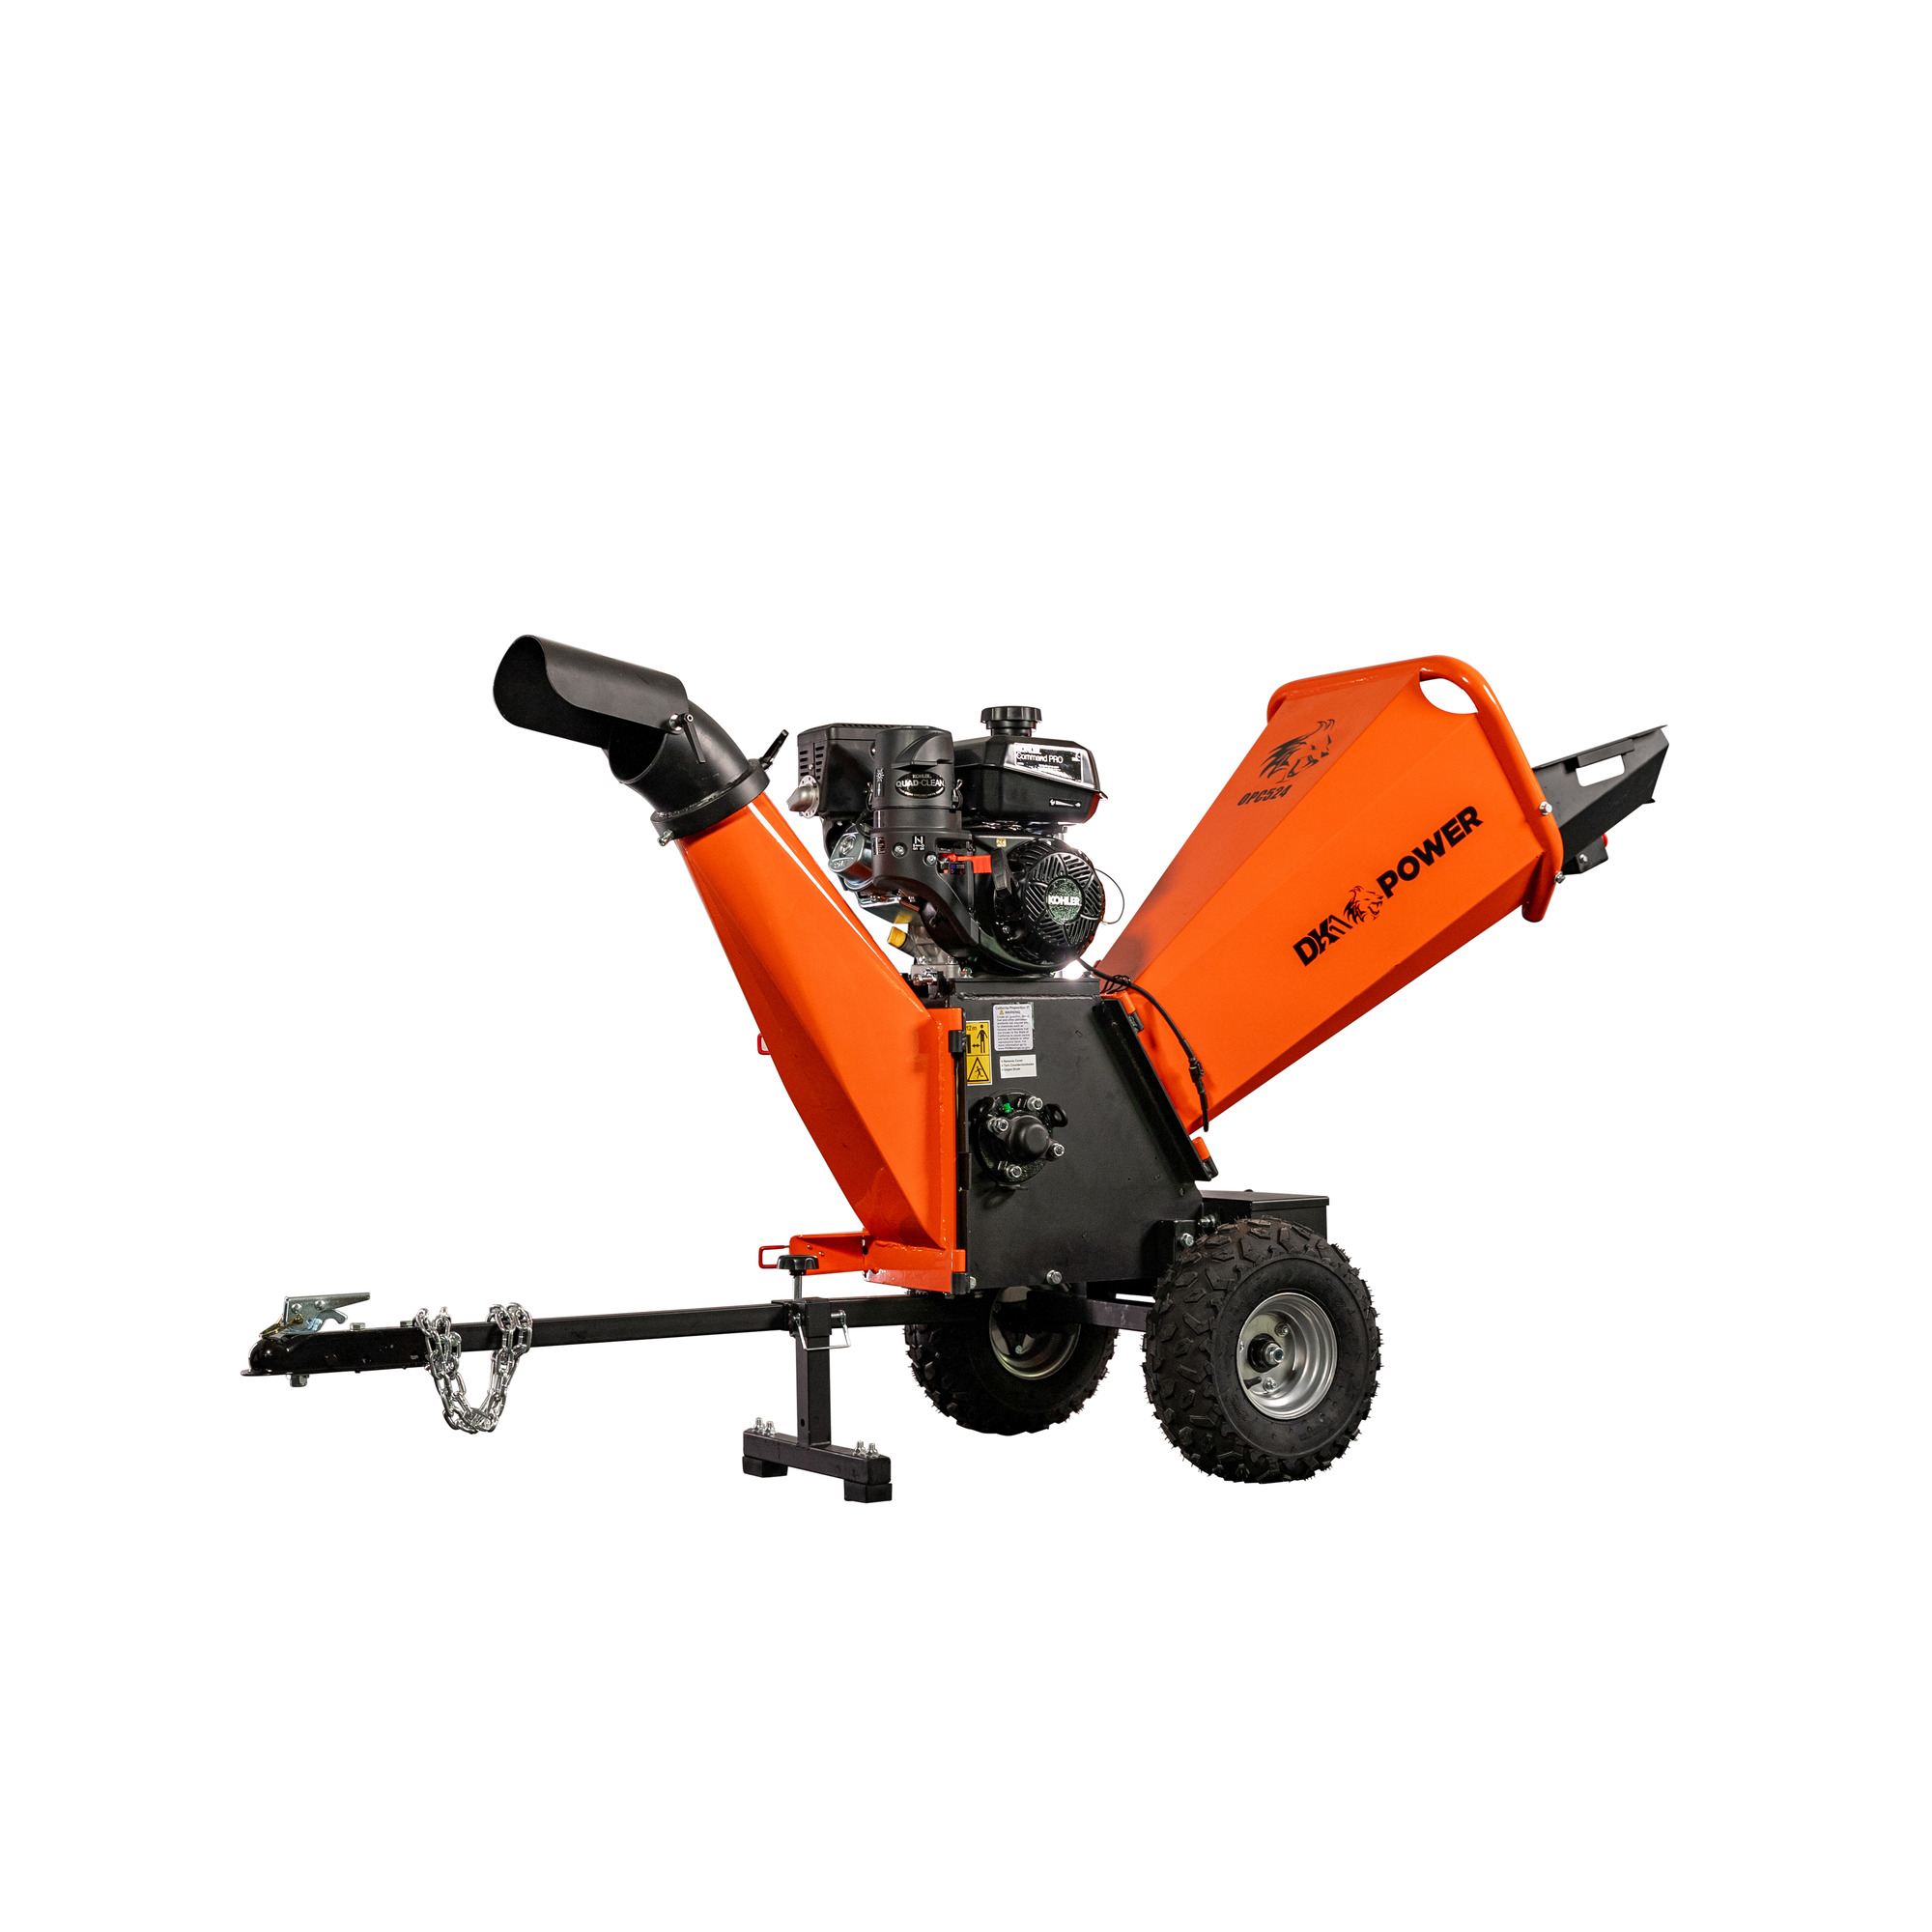 DK2 Power, 4Inch Kinetic Drum Chipper 7HP 208cc Engine, Engine Displacement 208 cc, Horsepower 7, Max. Cutting Thickness 4 in, Model OPC524